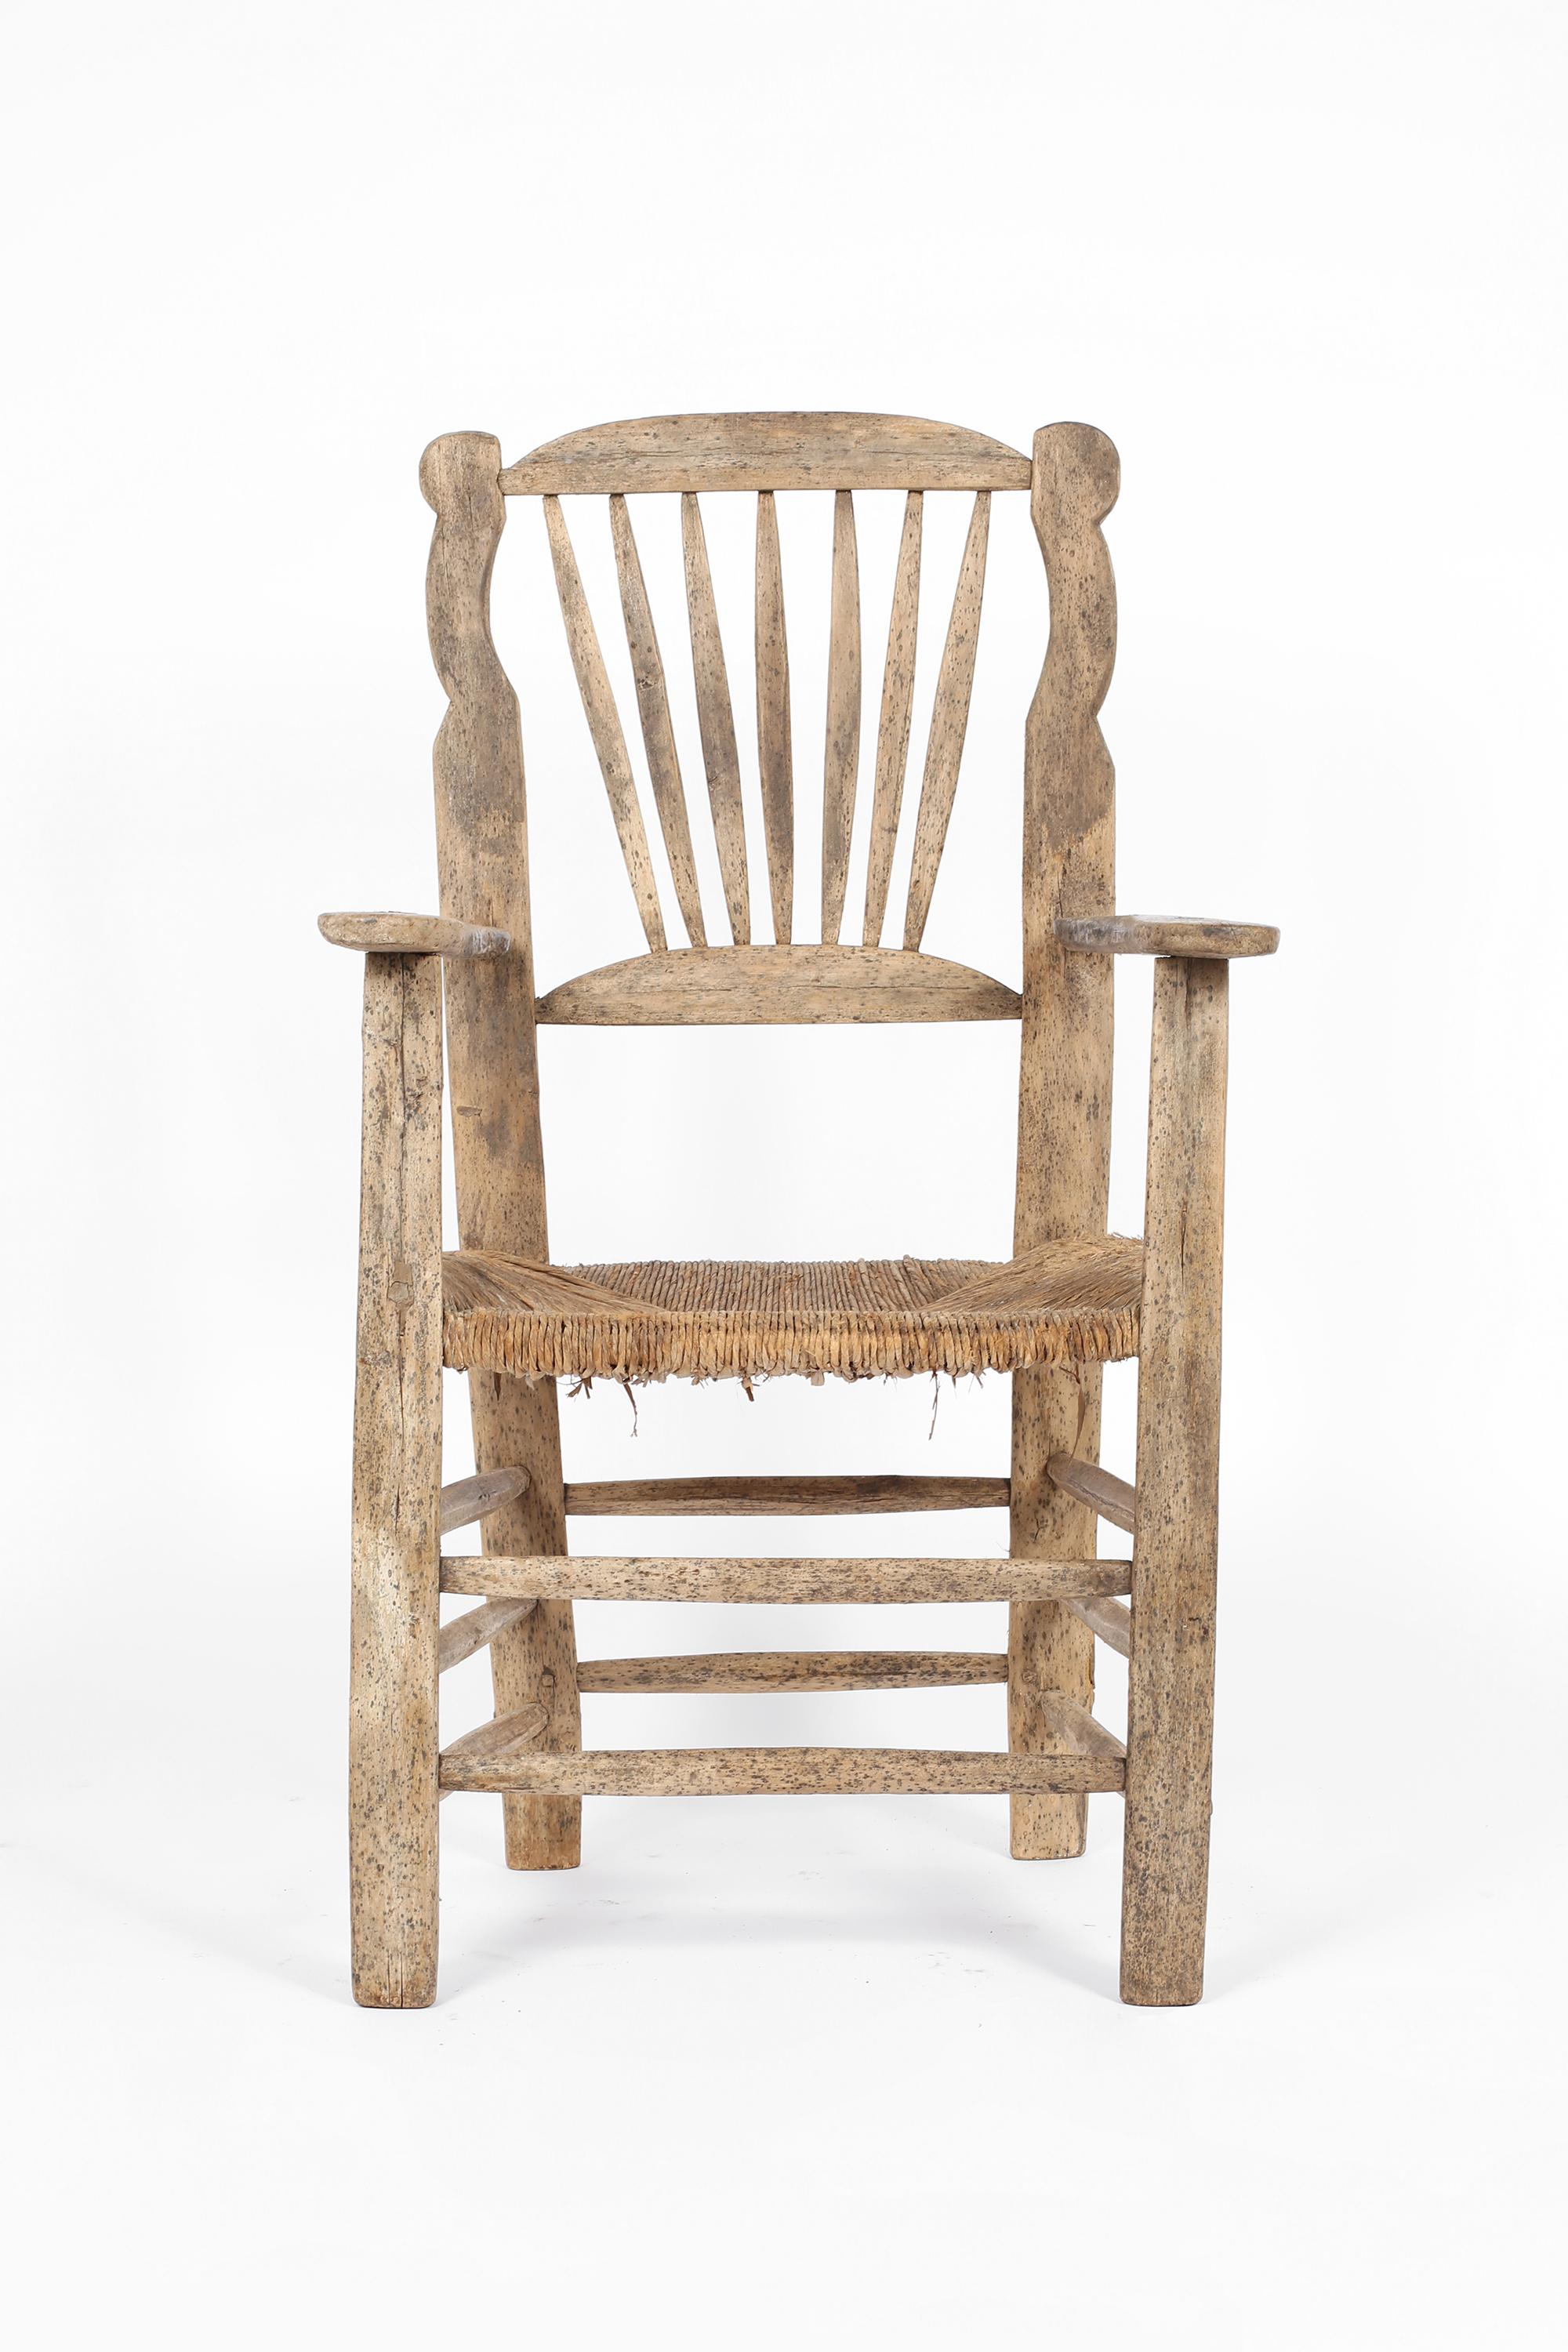 A large, characterful 19th century vernacular chair, primitively constructed from heavily patinated elm with original woven rush seat. Irish, c. 1850.